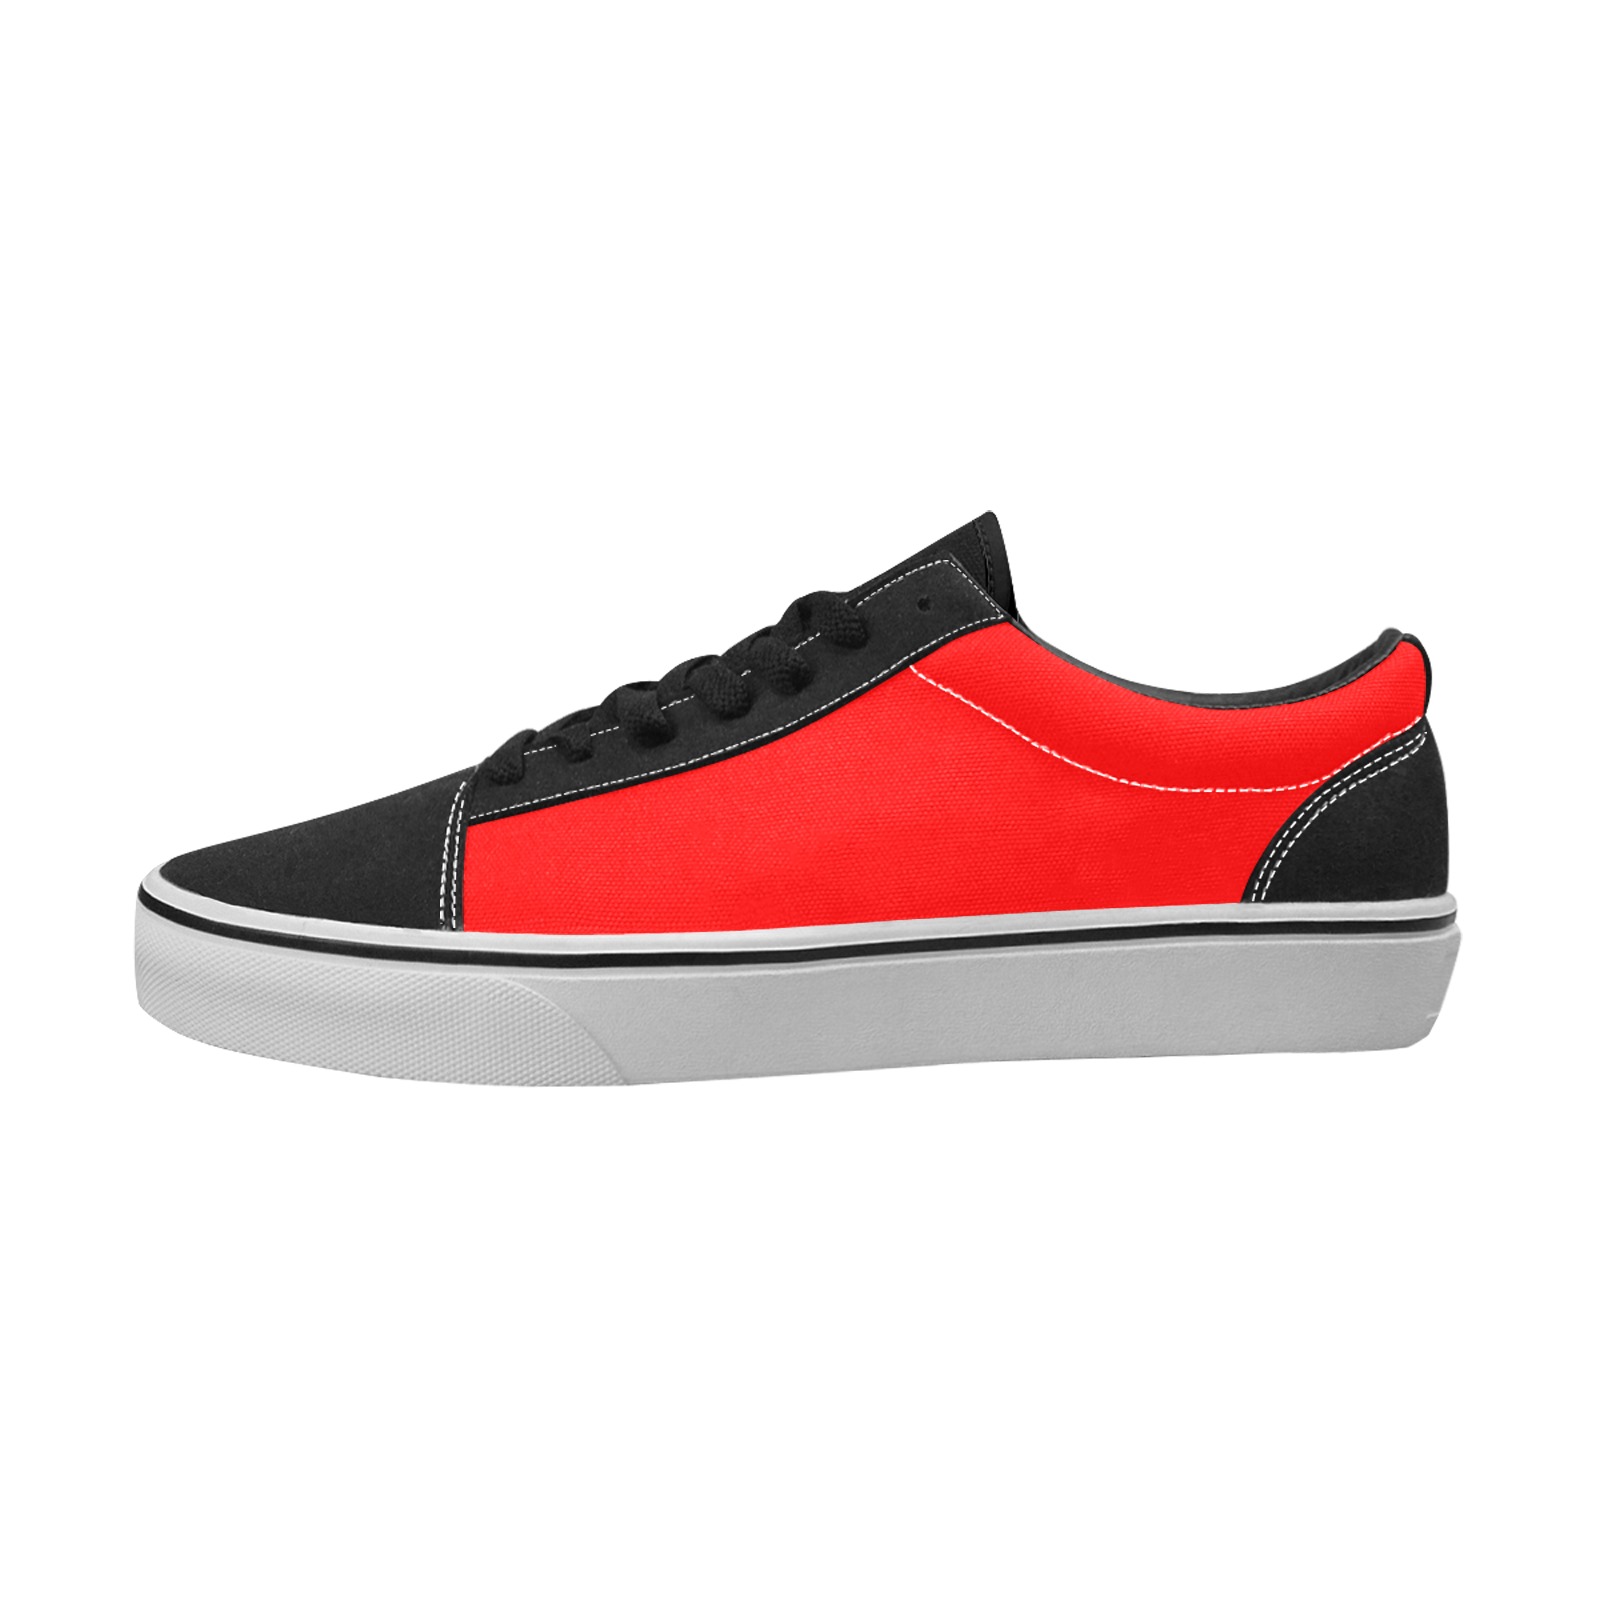 color red Women's Low Top Skateboarding Shoes (Model E001-2)